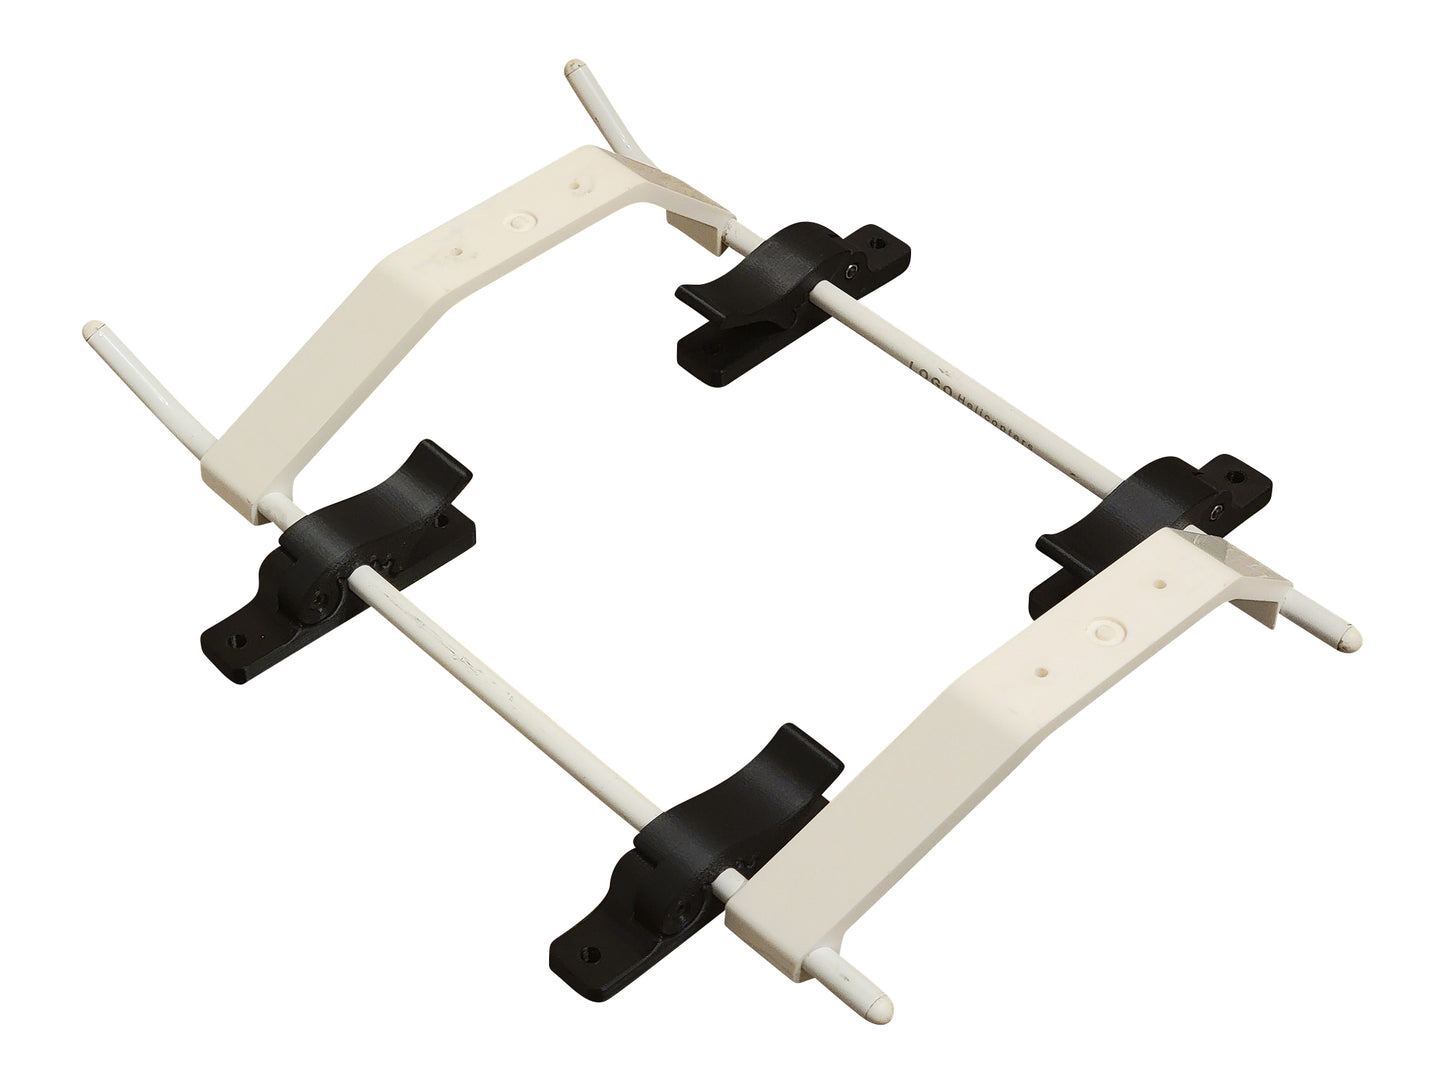 Heli Transport and Storage Skid Clamps (Set of 4)